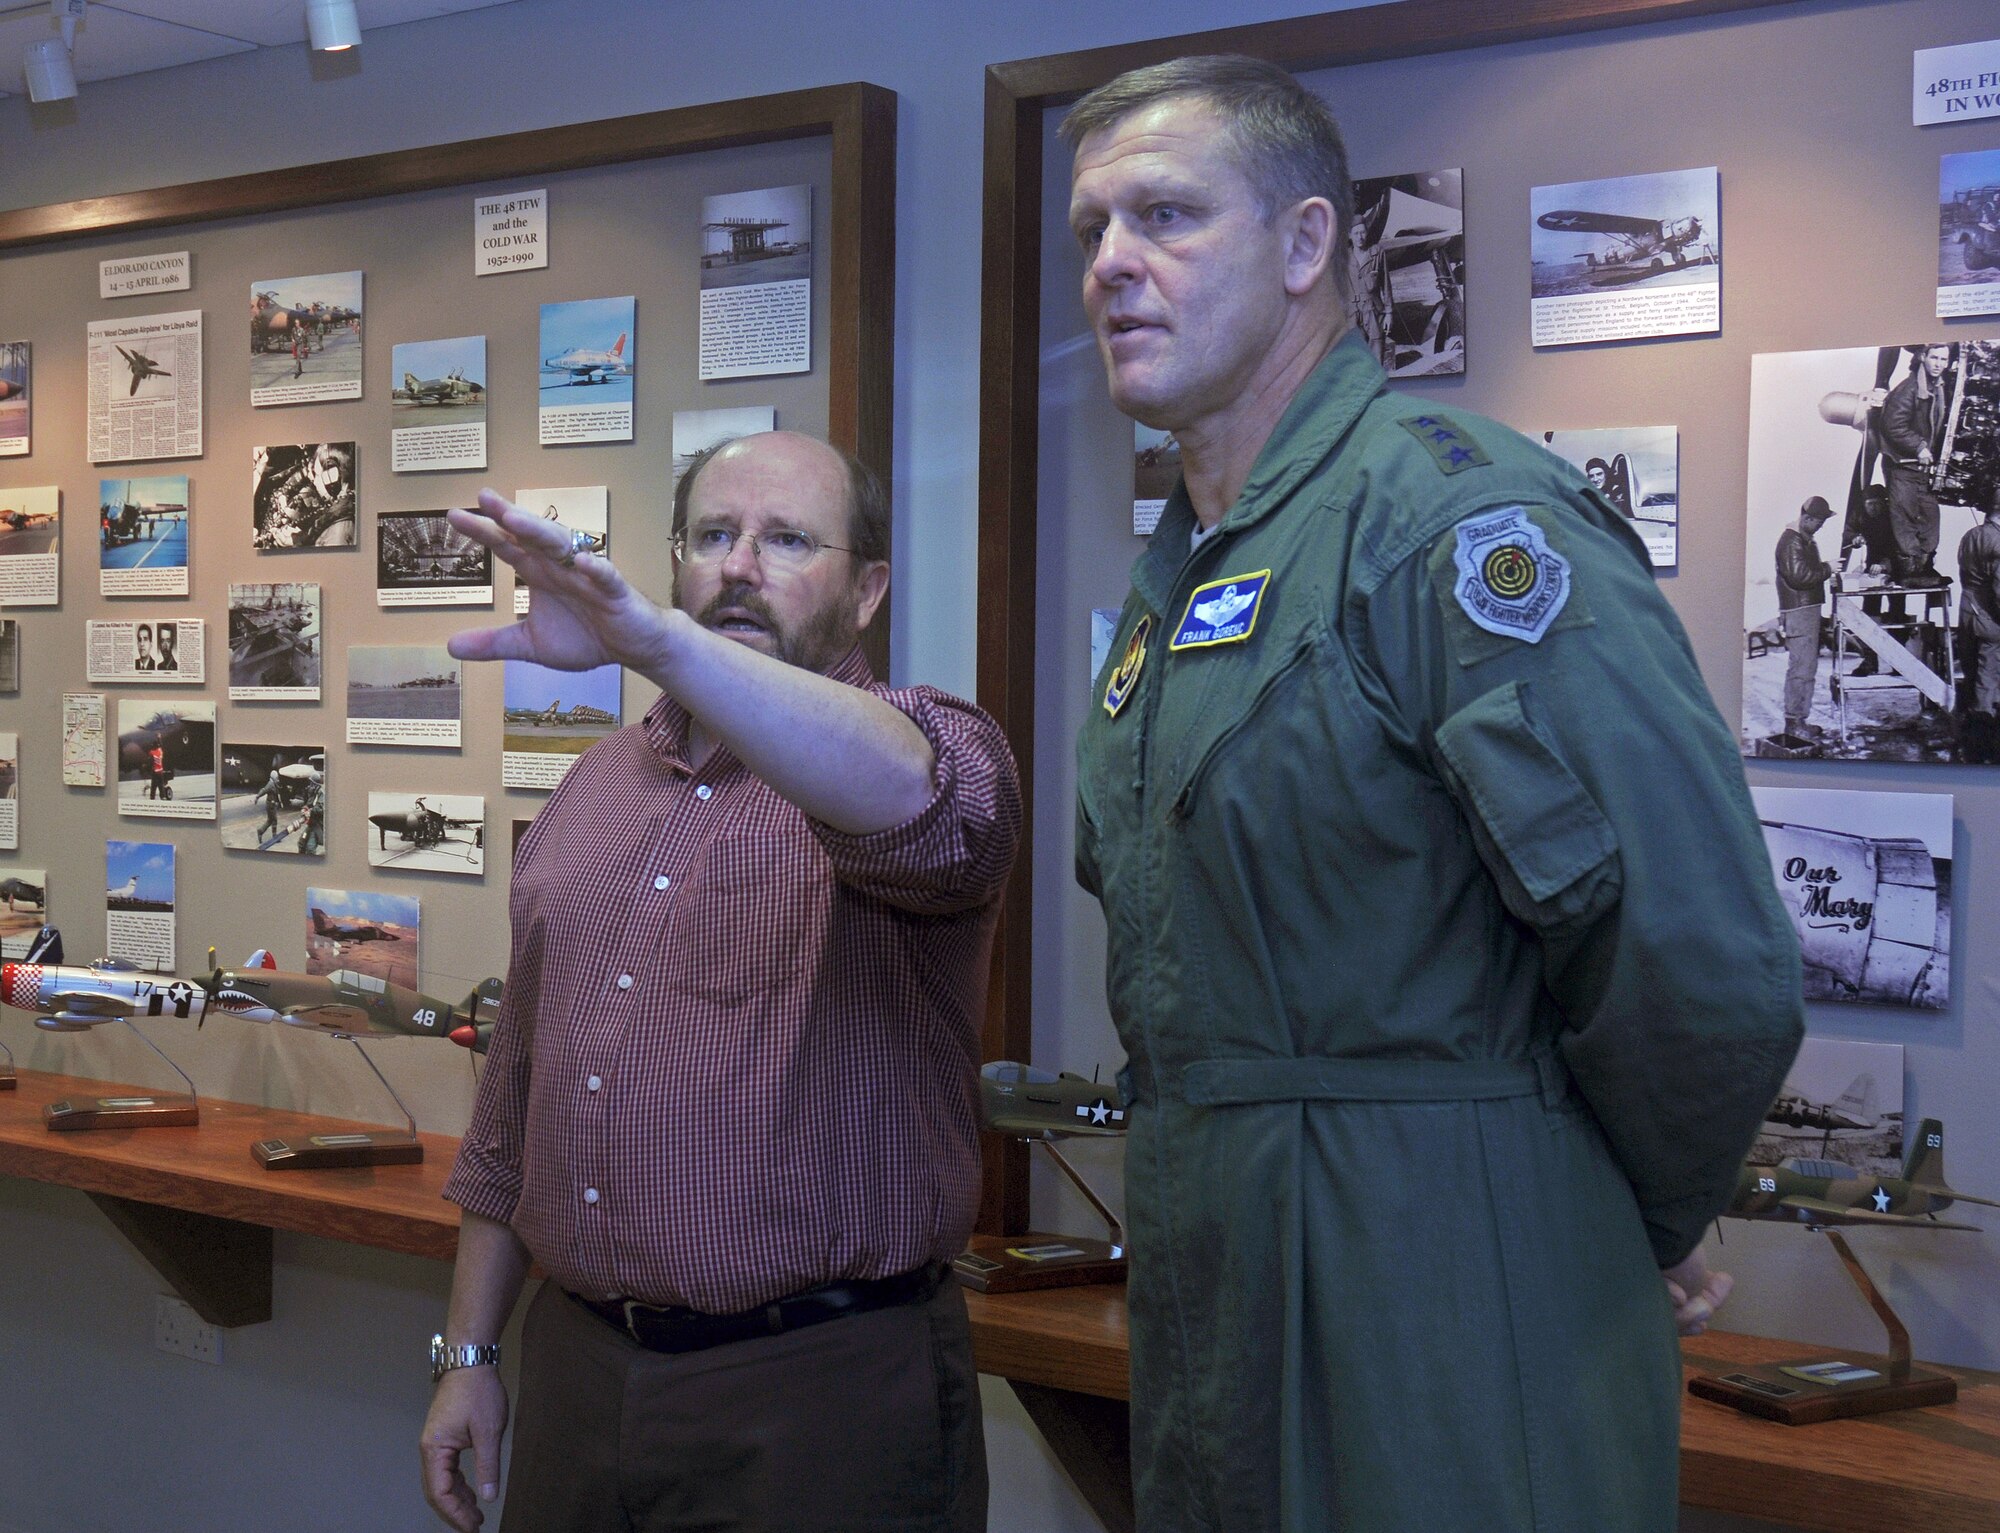 Billy Harris, 48th Fighter Wing historian discusses several heritage displays at the newly opened 48th Operations Group Heritage Center with Lt. Gen. Frank Gorenc, 3rd Air Force commander Sept. 8, 2009, at RAF Lakenheath, England. General Gorenc visited Lakenheath to discuss issues Airmen have in today’s Air Force. (U.S. Air Force photo by Senior Airman Kristopher Levasseur)